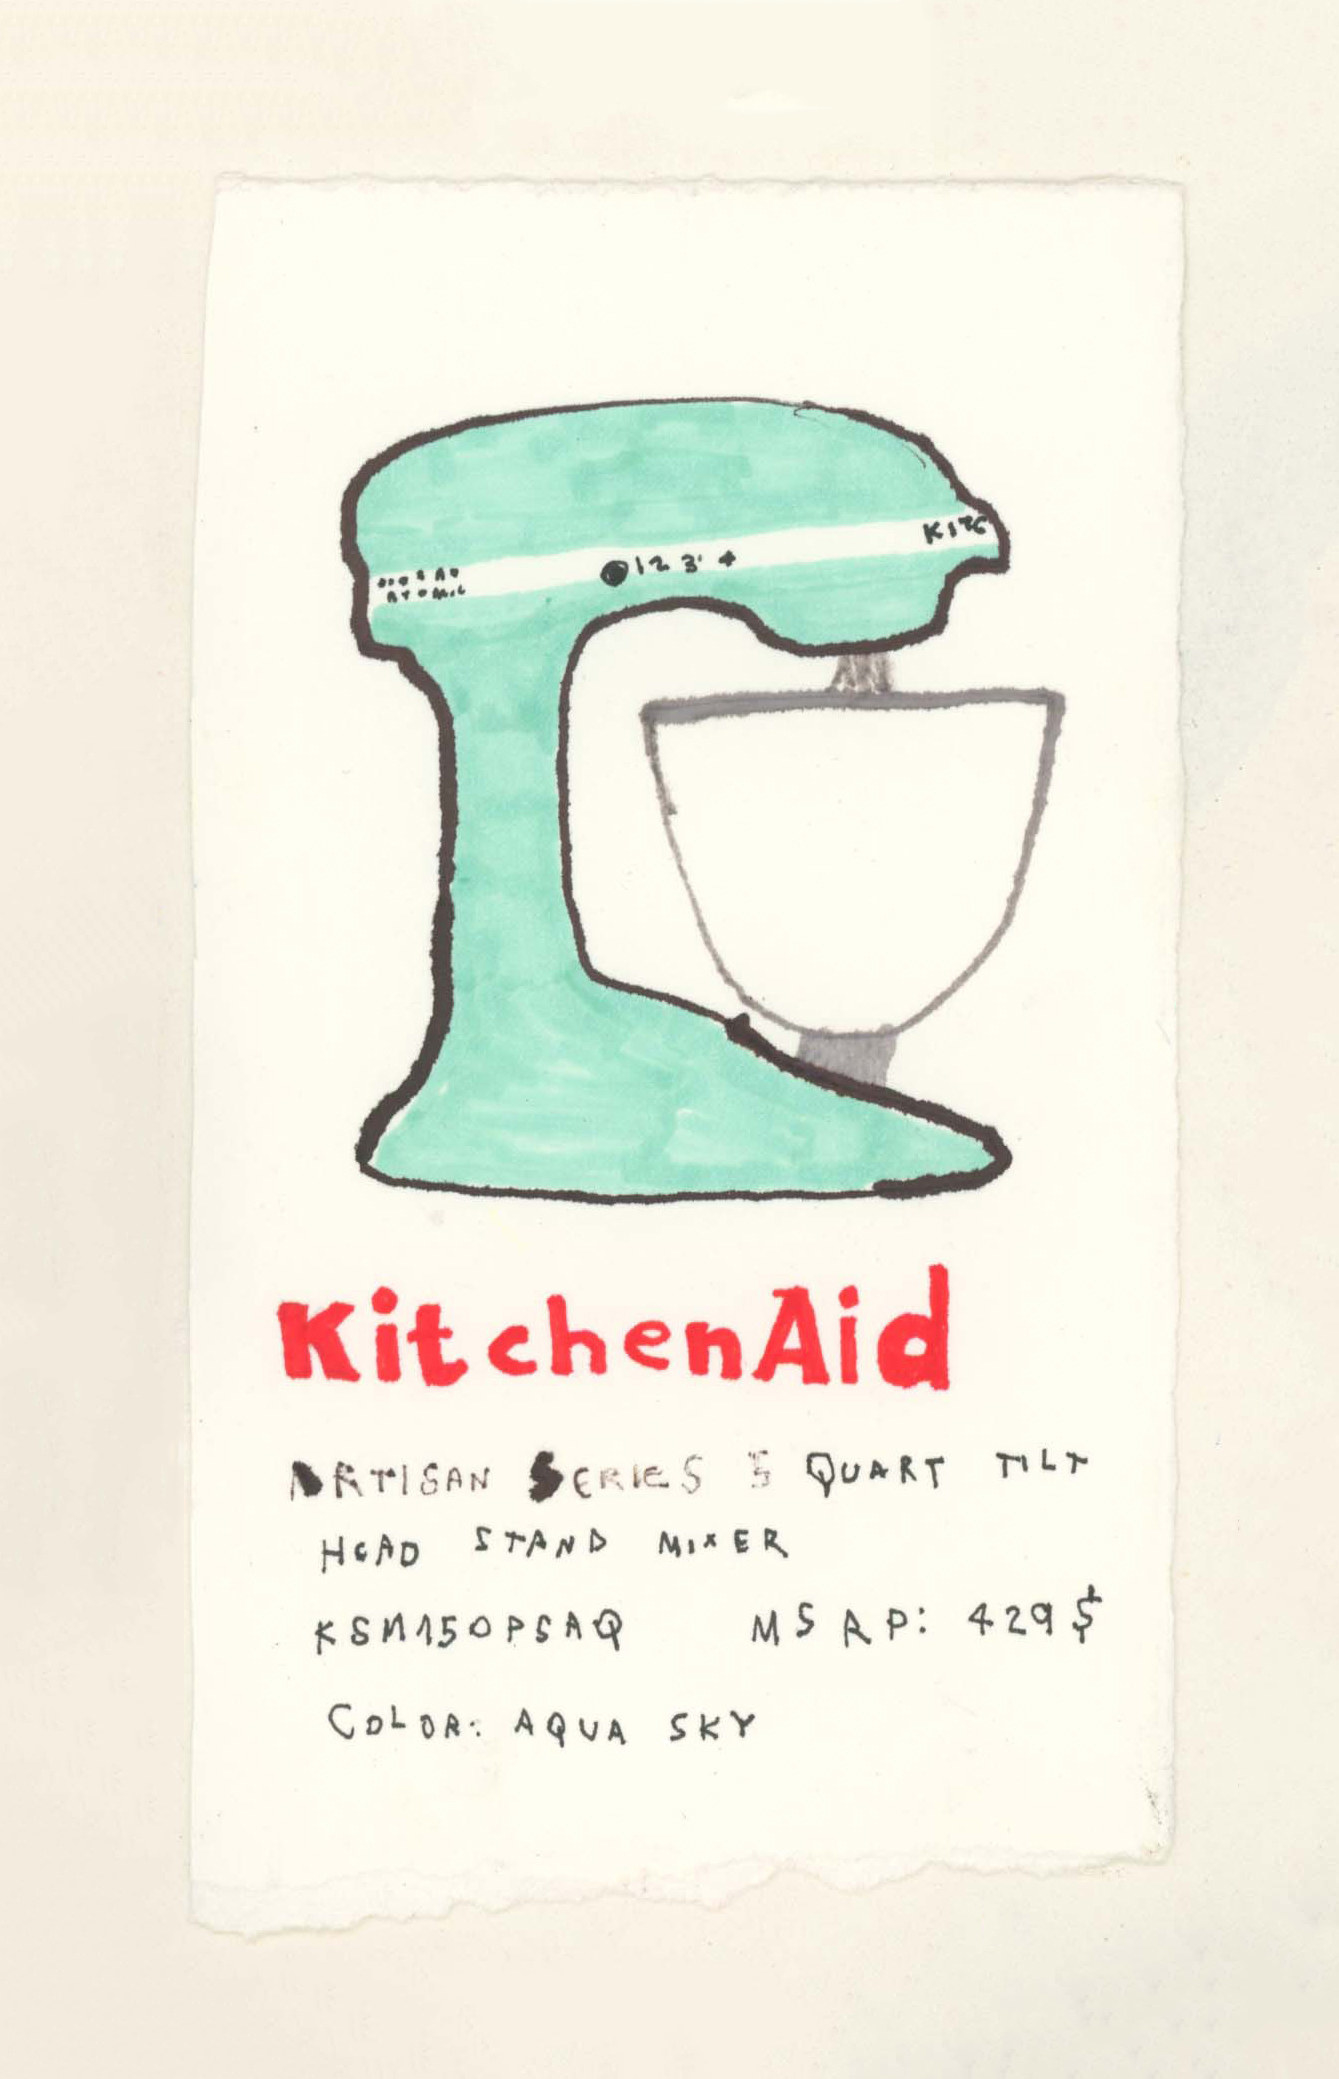 kitchen aid stand mixer in the color aqua sky